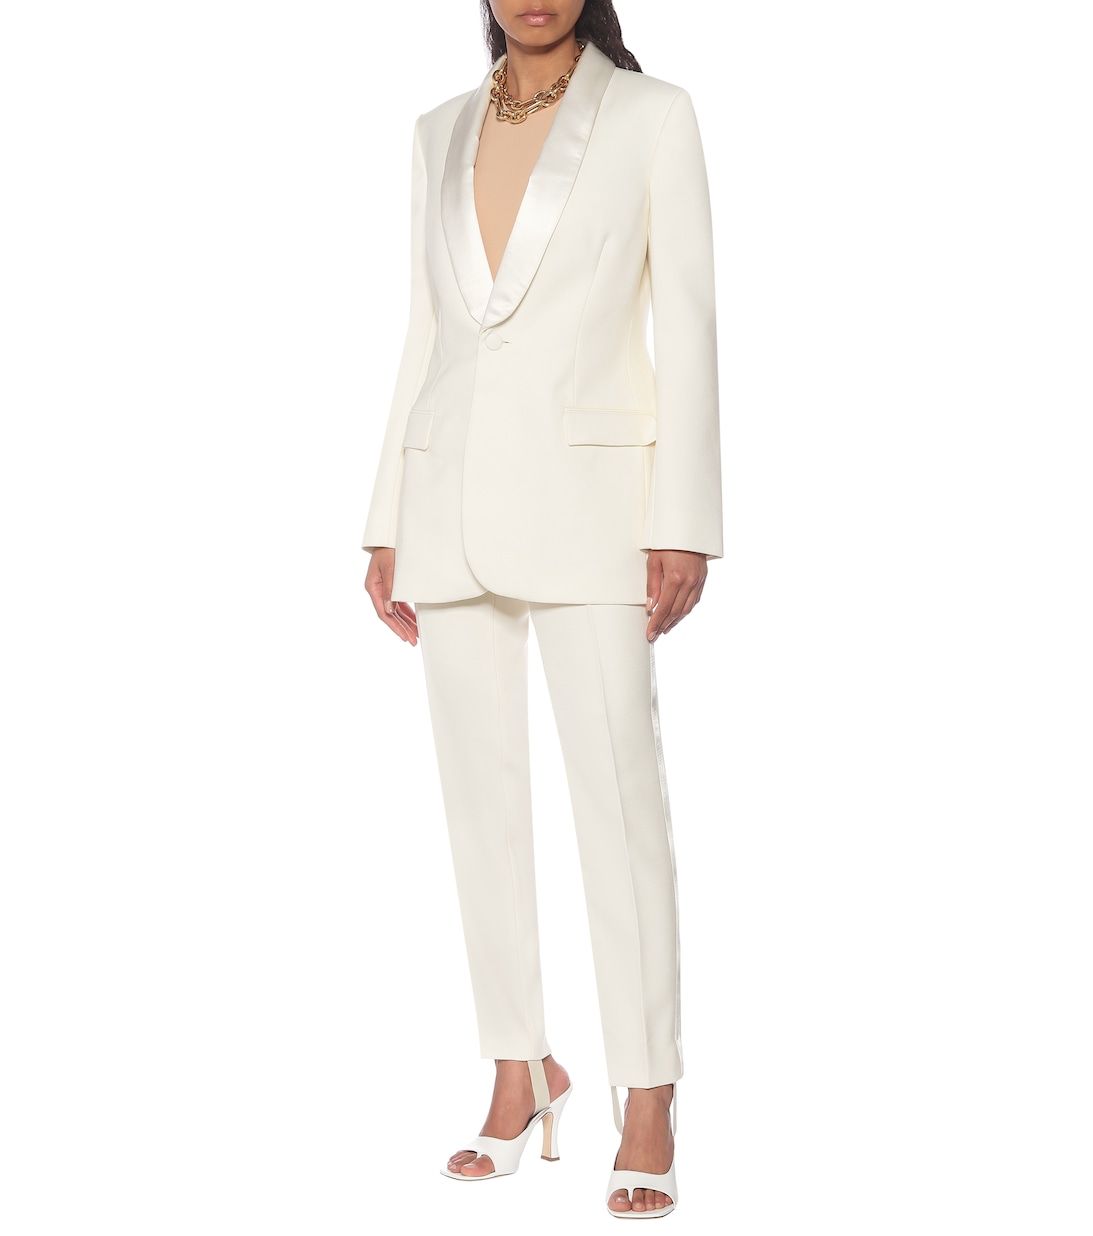 Adult White Suit for Women